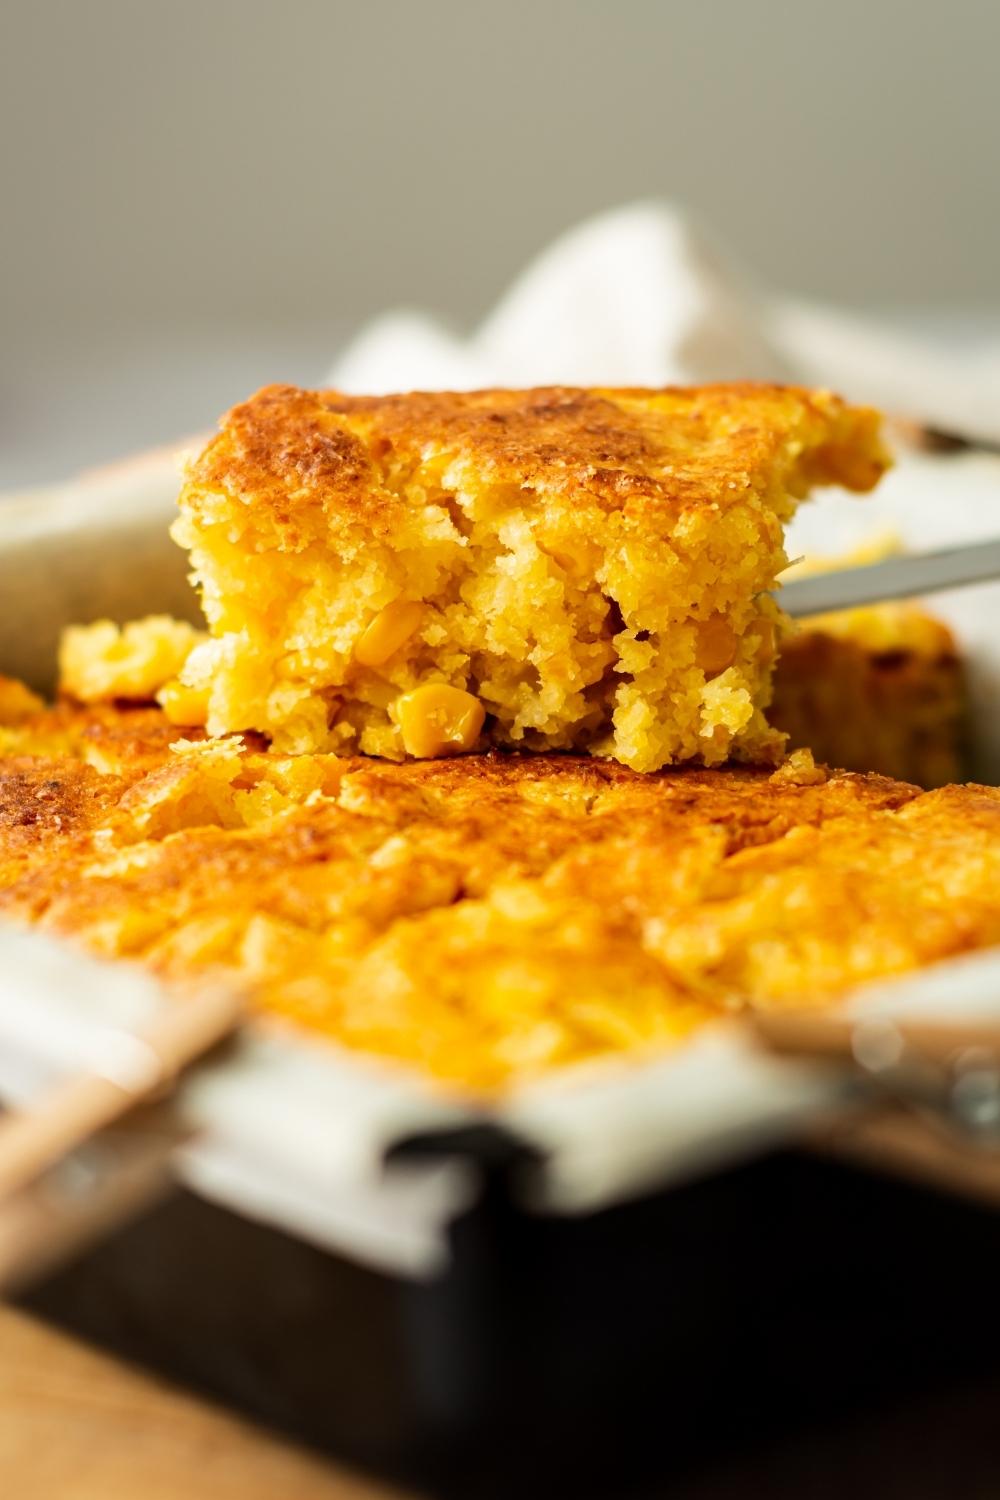 A square of sweet corn cake.